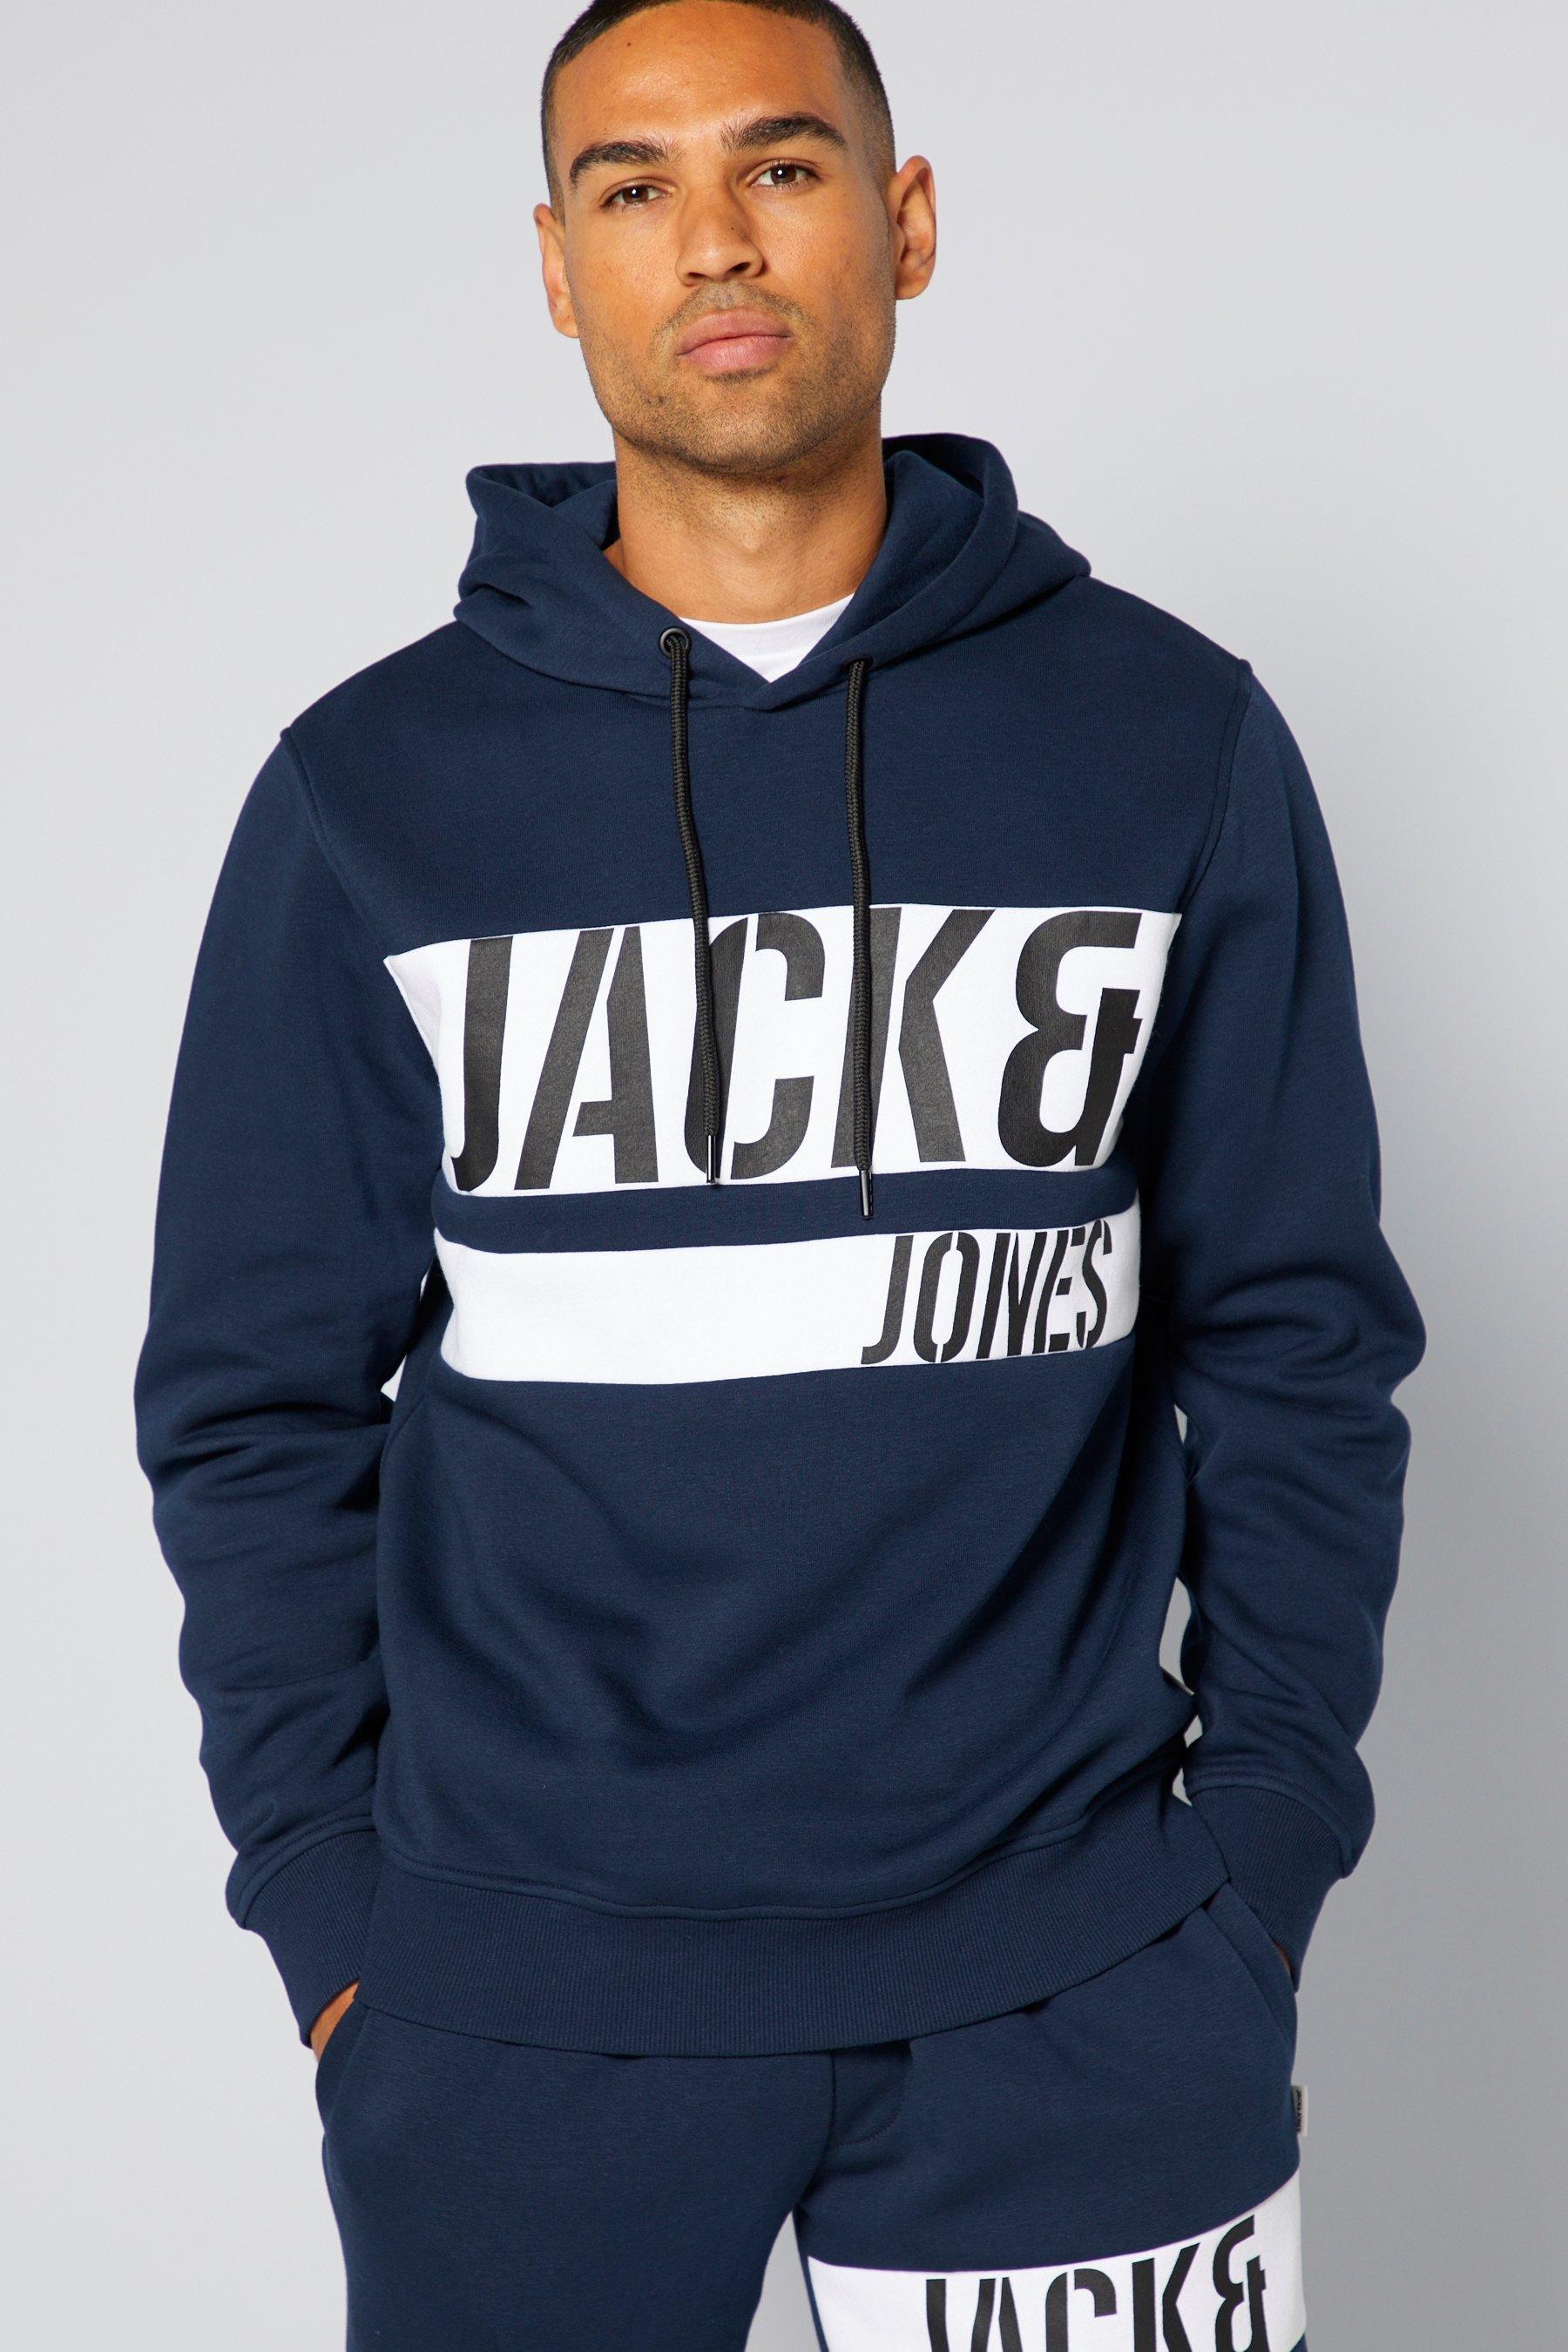 jack and jones hoodie - mens - blue - size: small